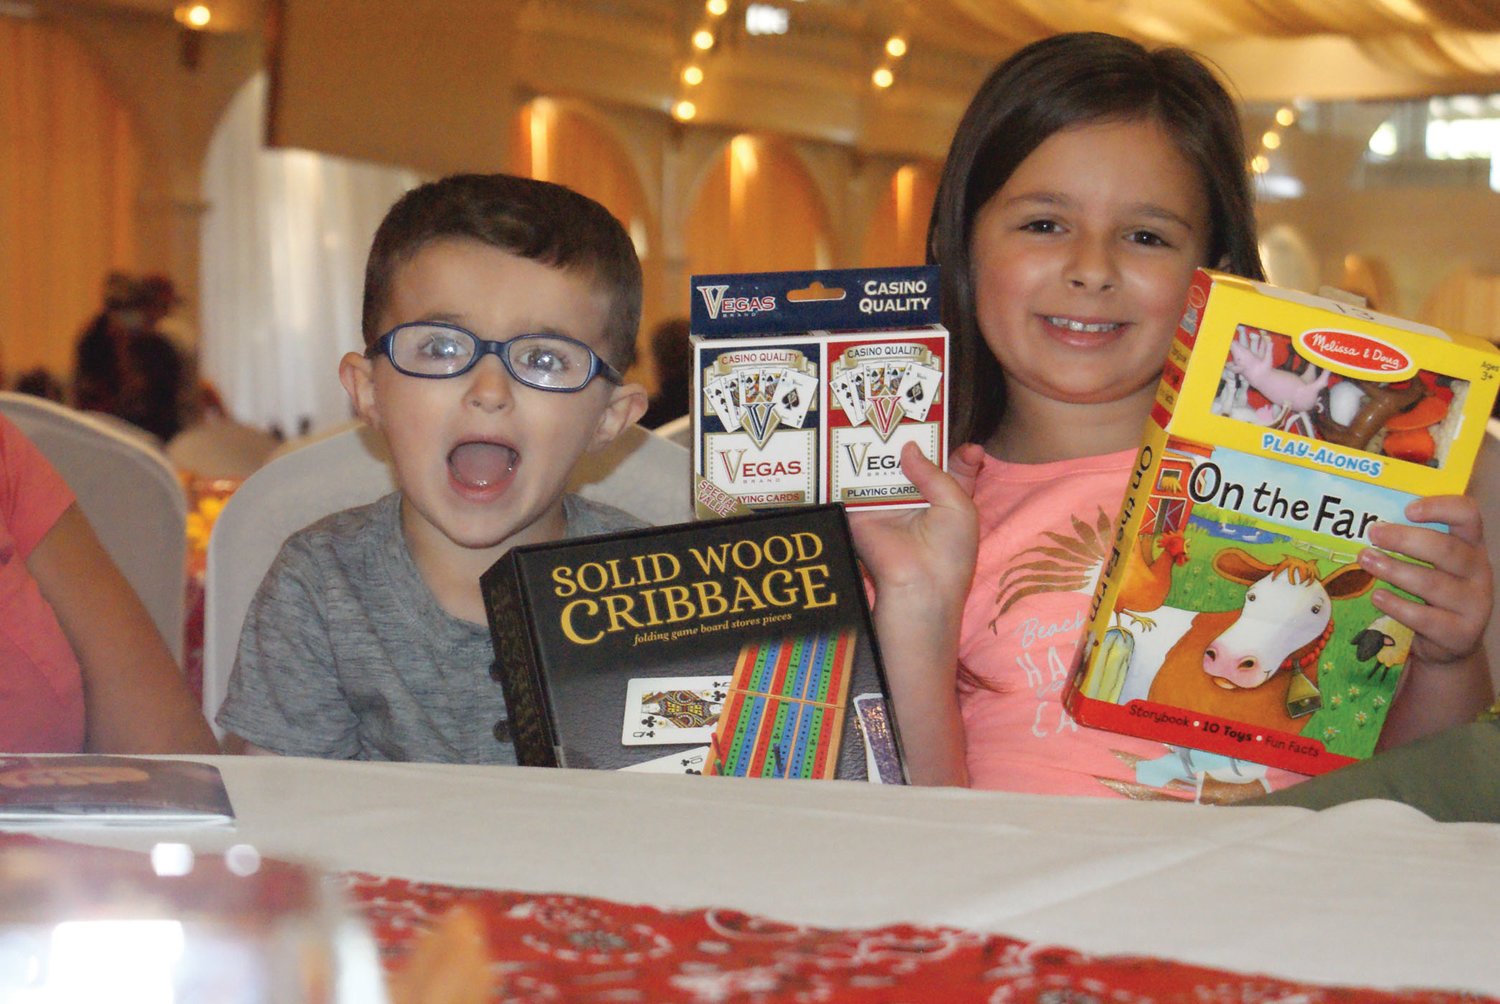 HAPPY WINNERS: The smiles say it all as the Volino siblings, Teddy, 4, and Sophia, 6, show off their winnings after the penny social.